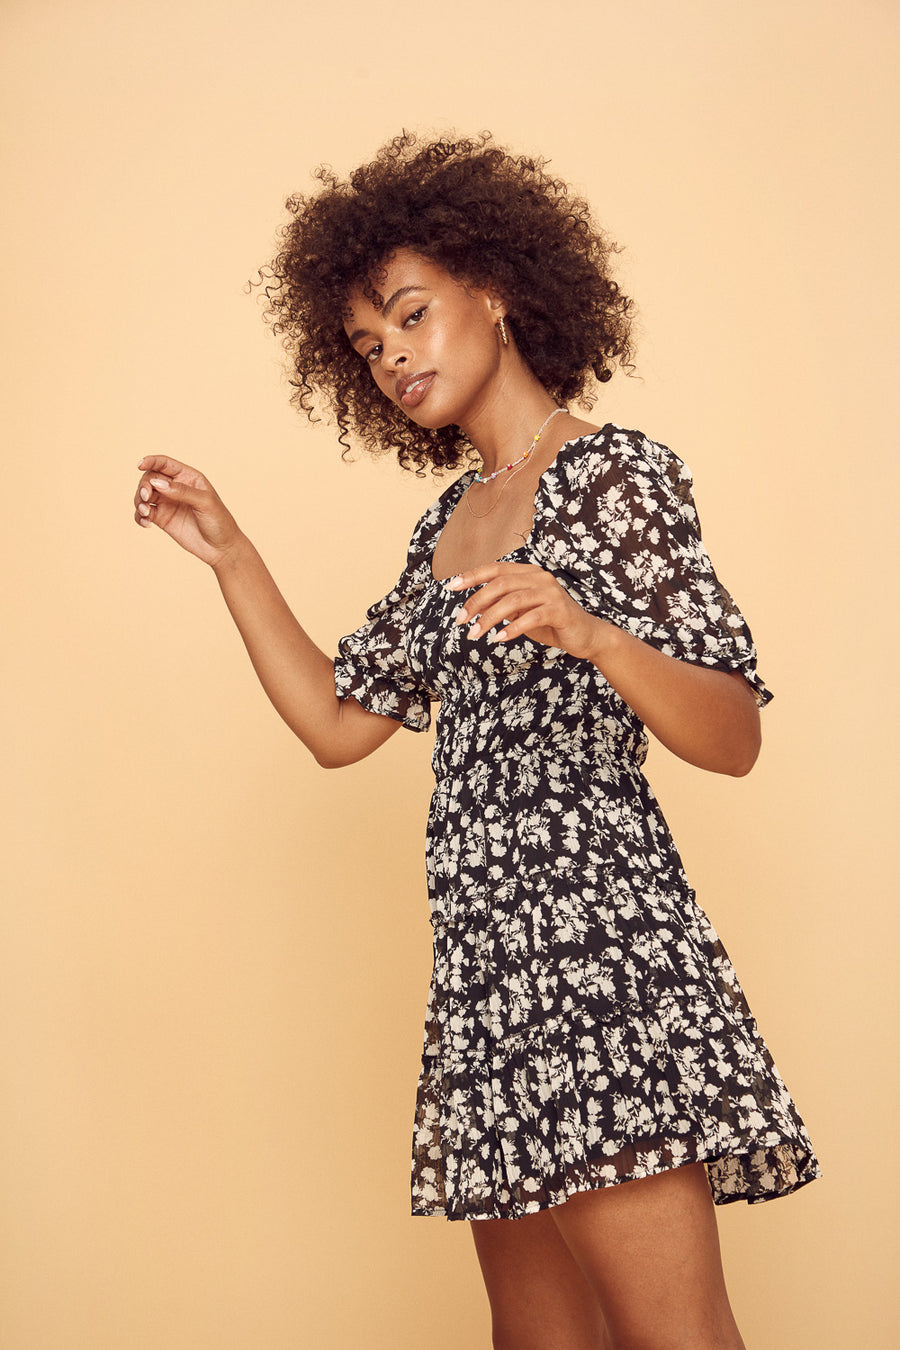 Black and White Floral Dress - Trixxi Clothing